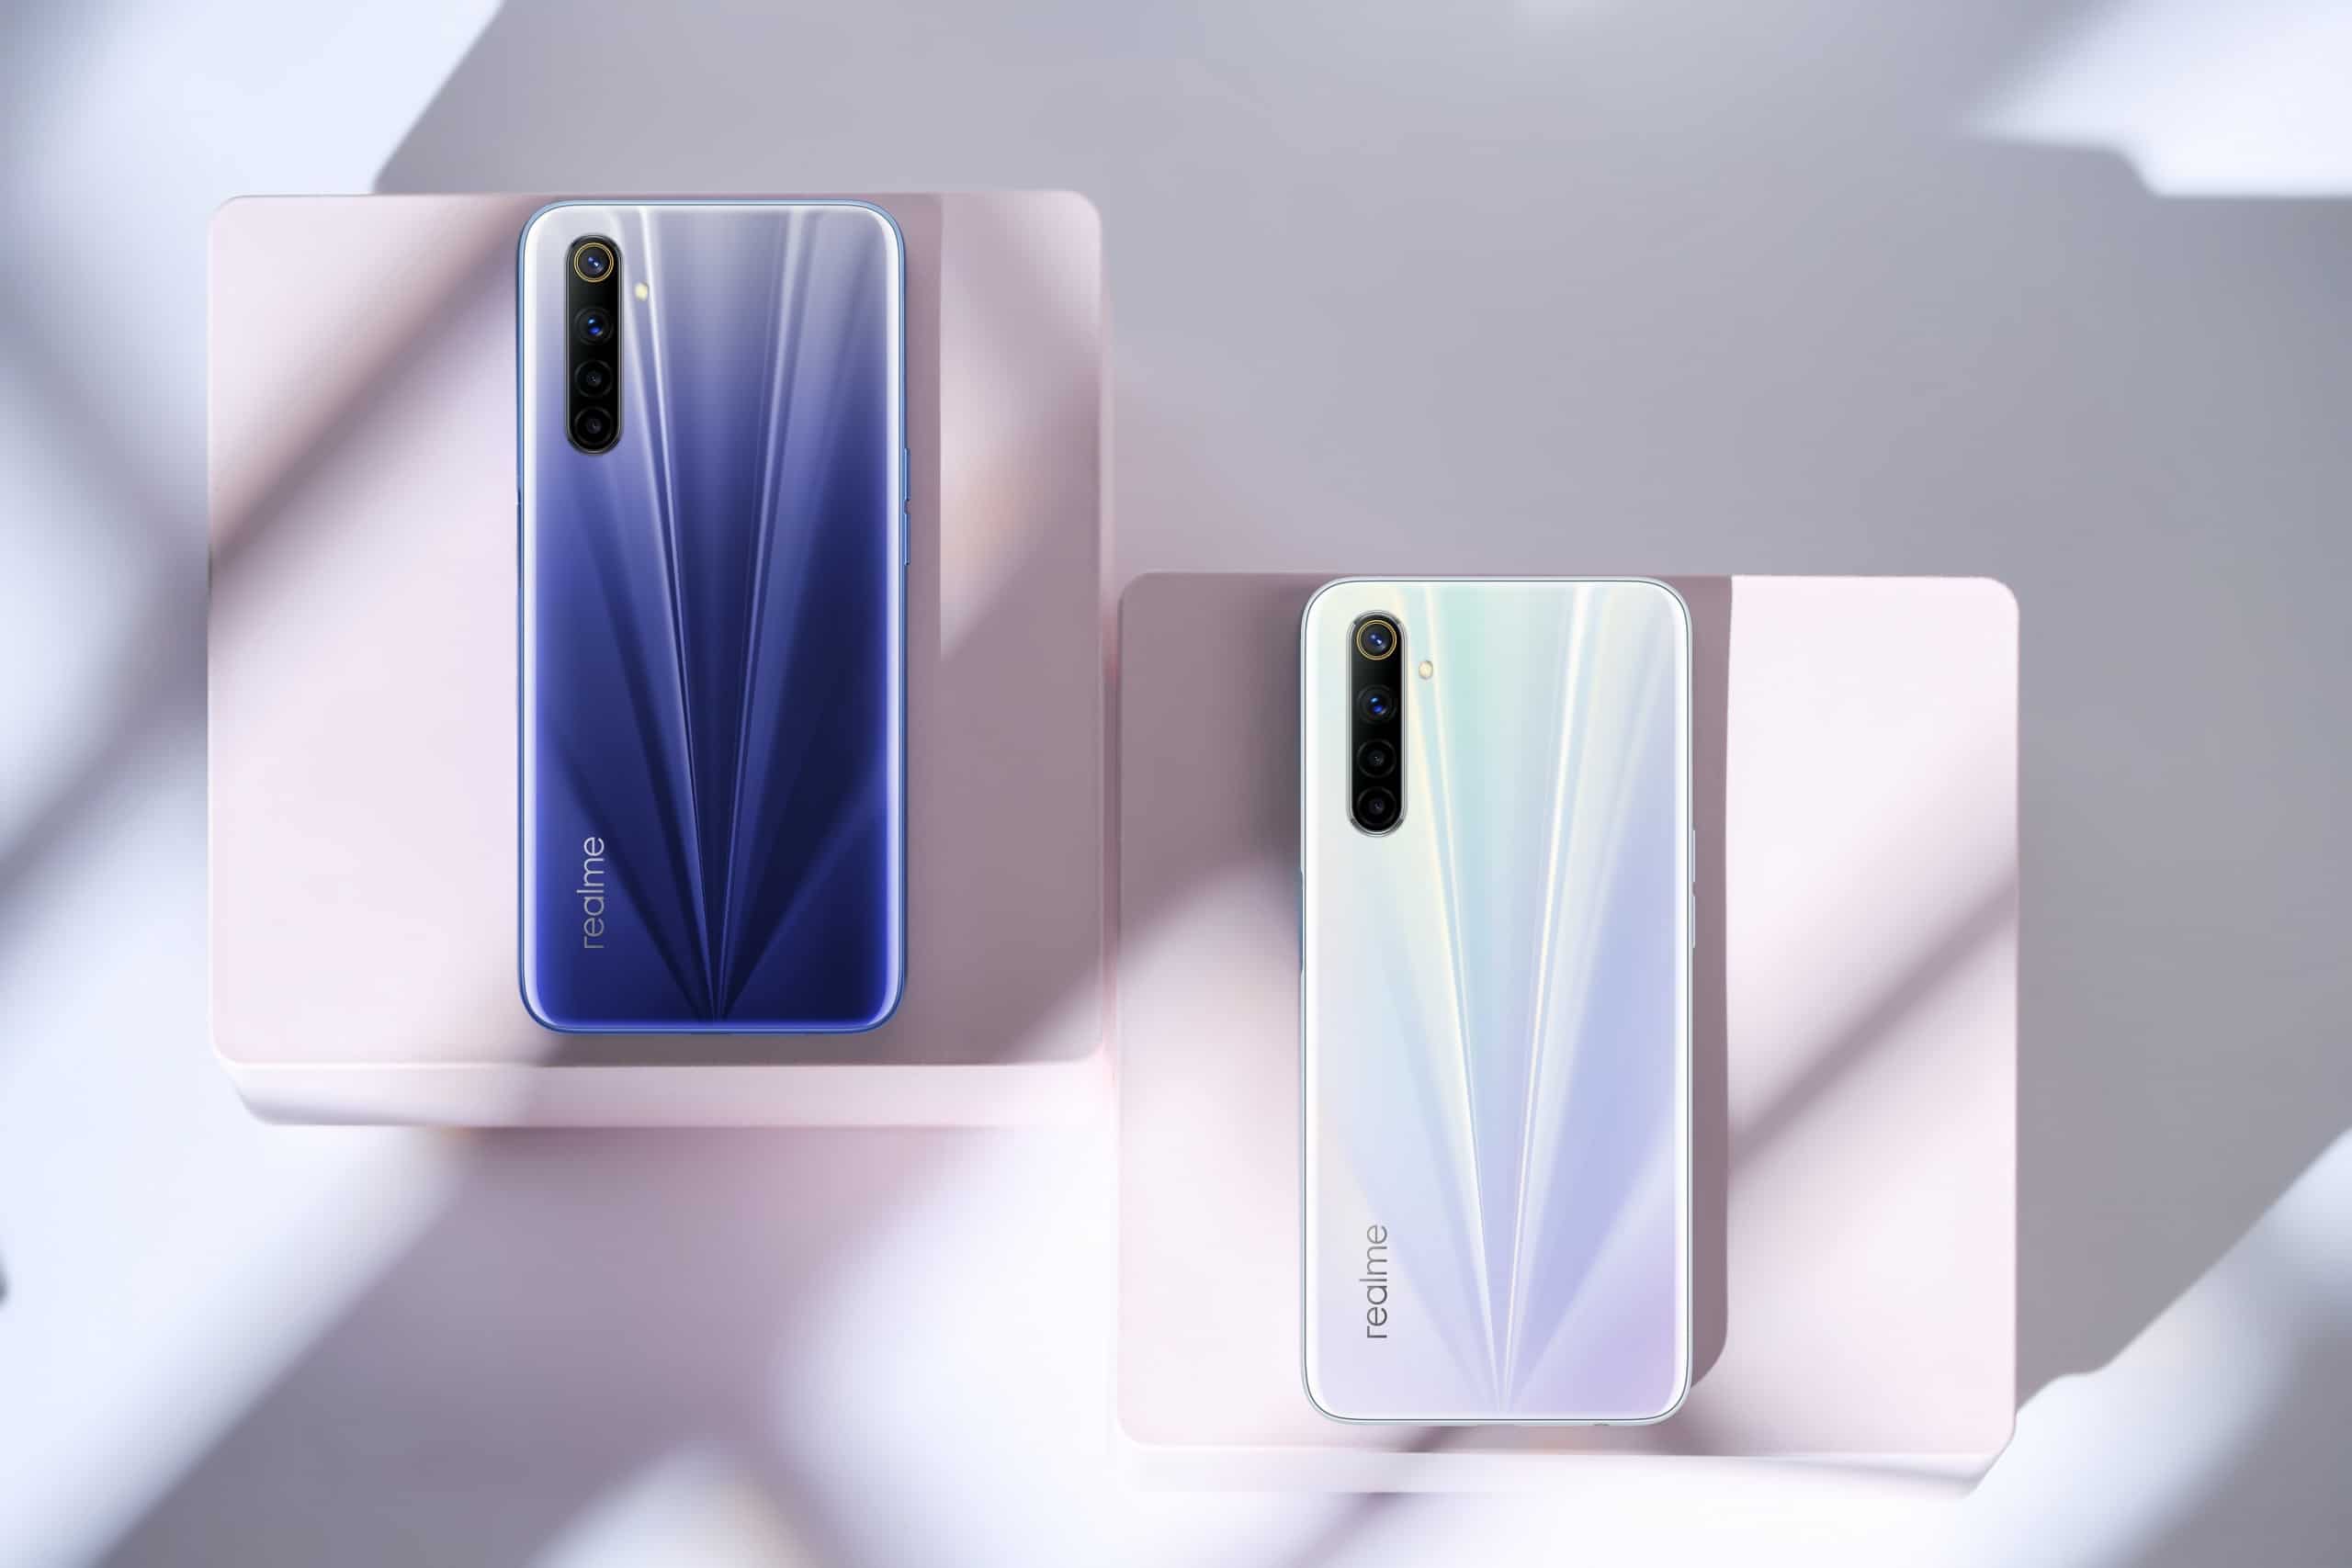 realme set to launch its Latest Range of Smartphones in UAE